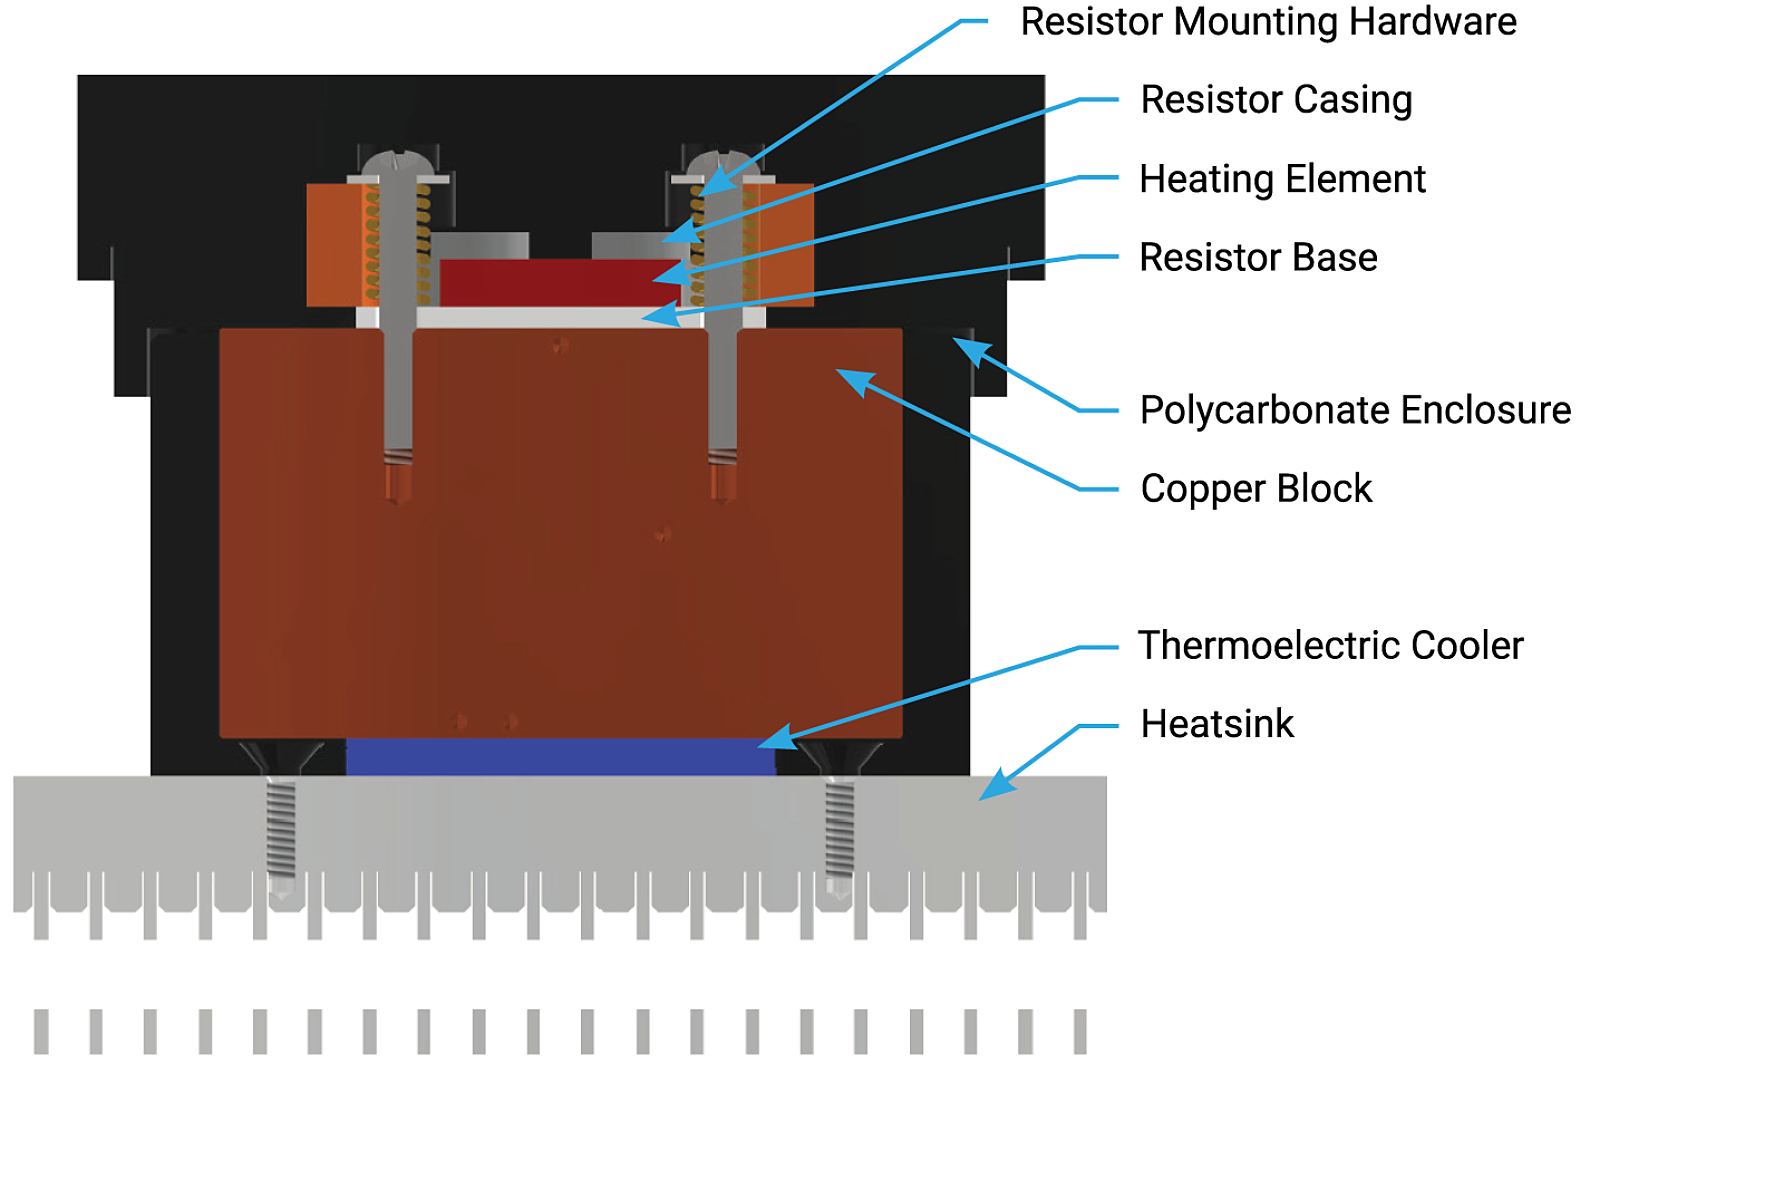 Magna-Power developed thermal resistivity measurement appartus, measuring between device package and heatsink.